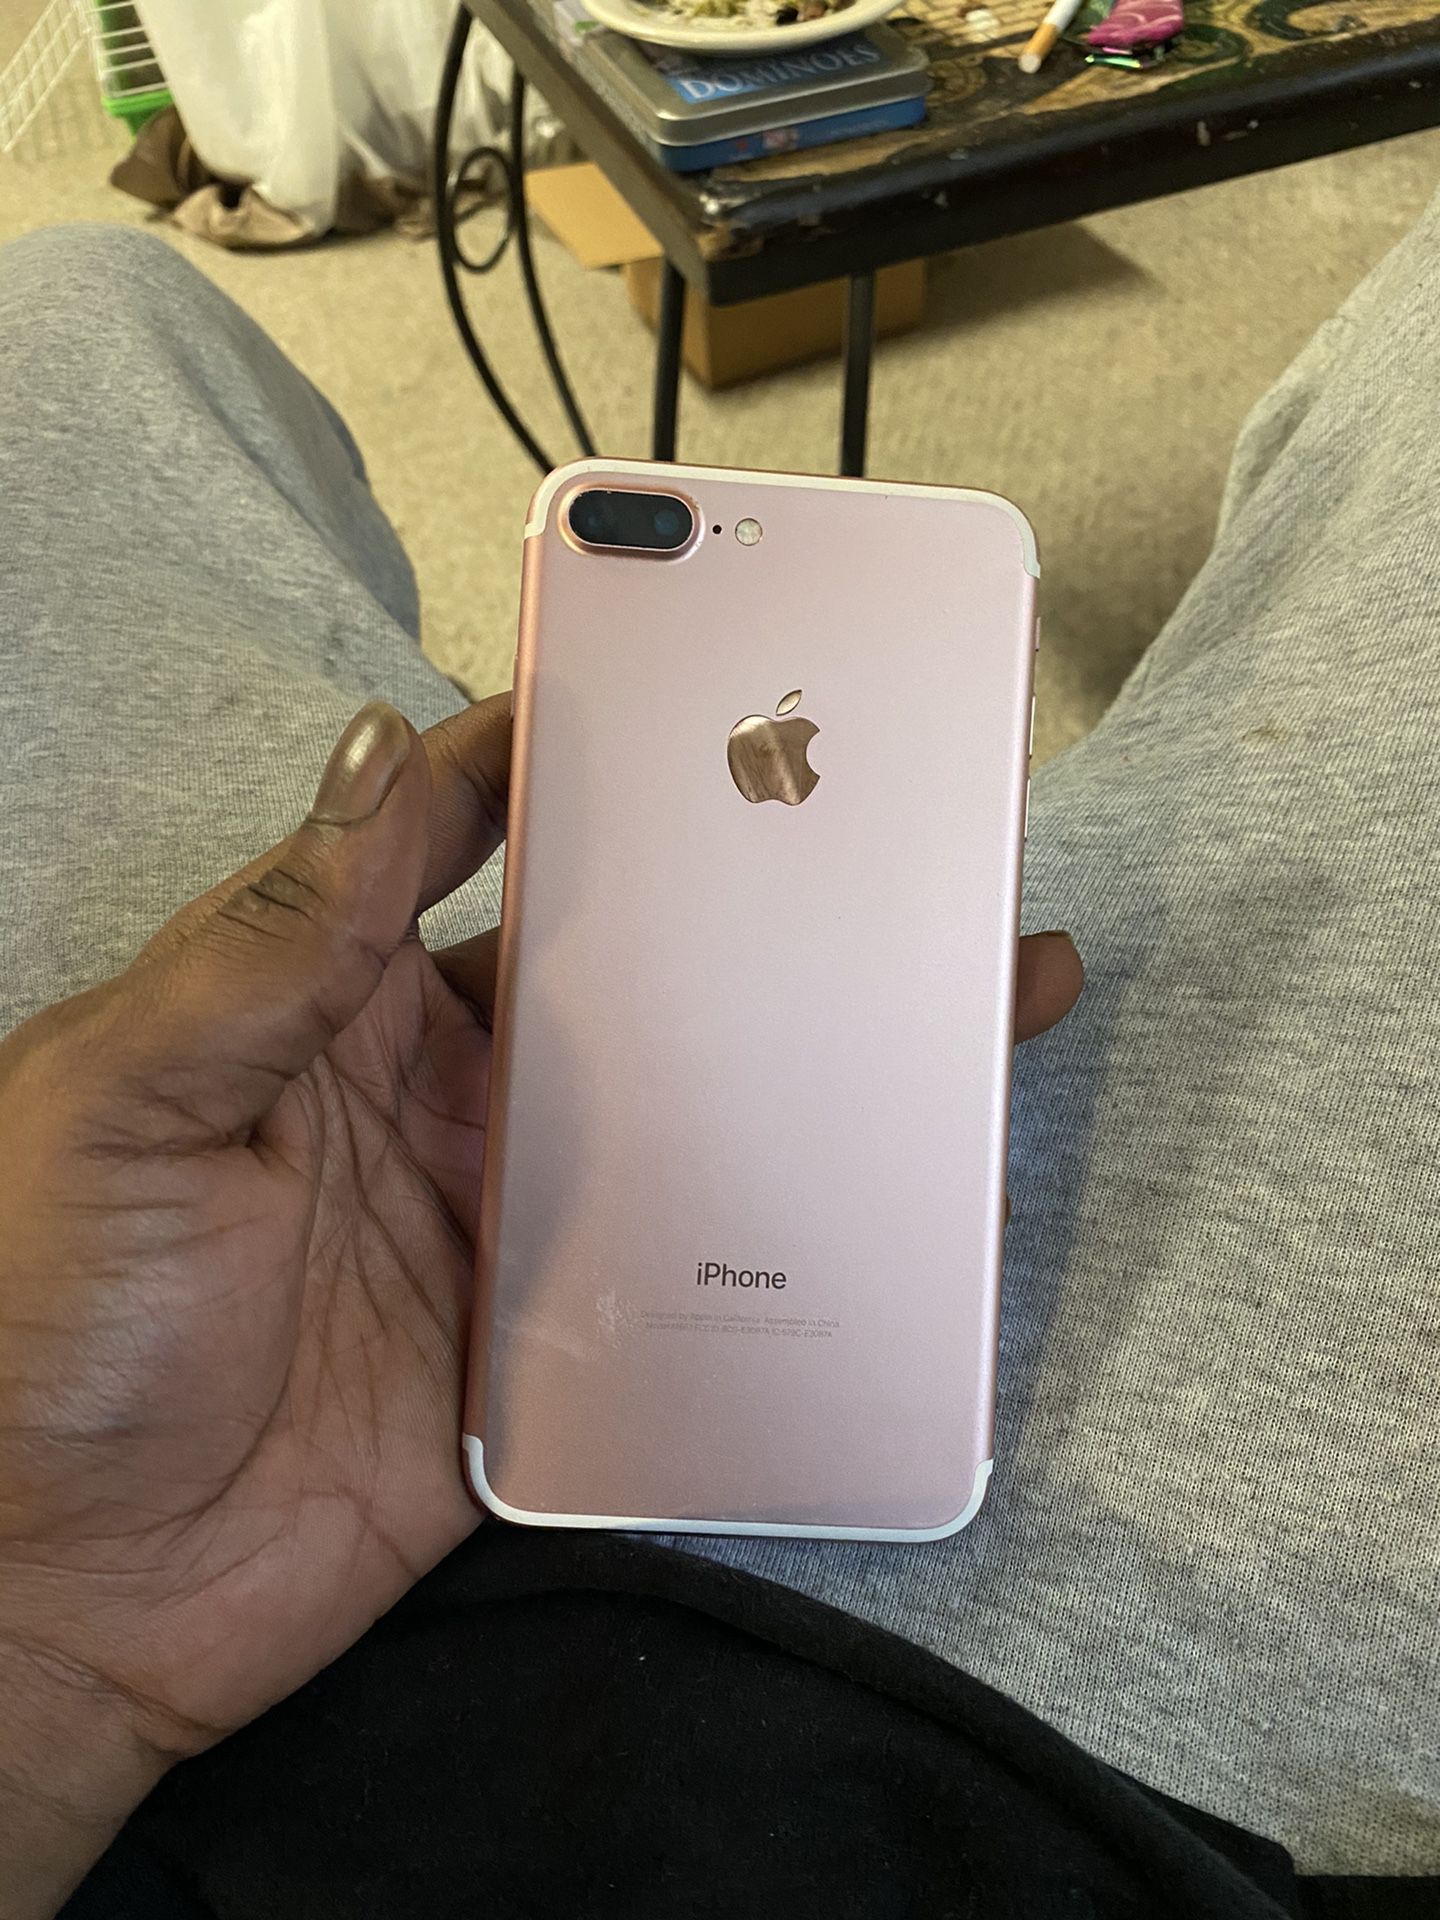 iPhone 7 Plus rose gold port to any carrier and I also have a brand new one month old iPhone 7 Plus are black from metro asking 600 or best offer for